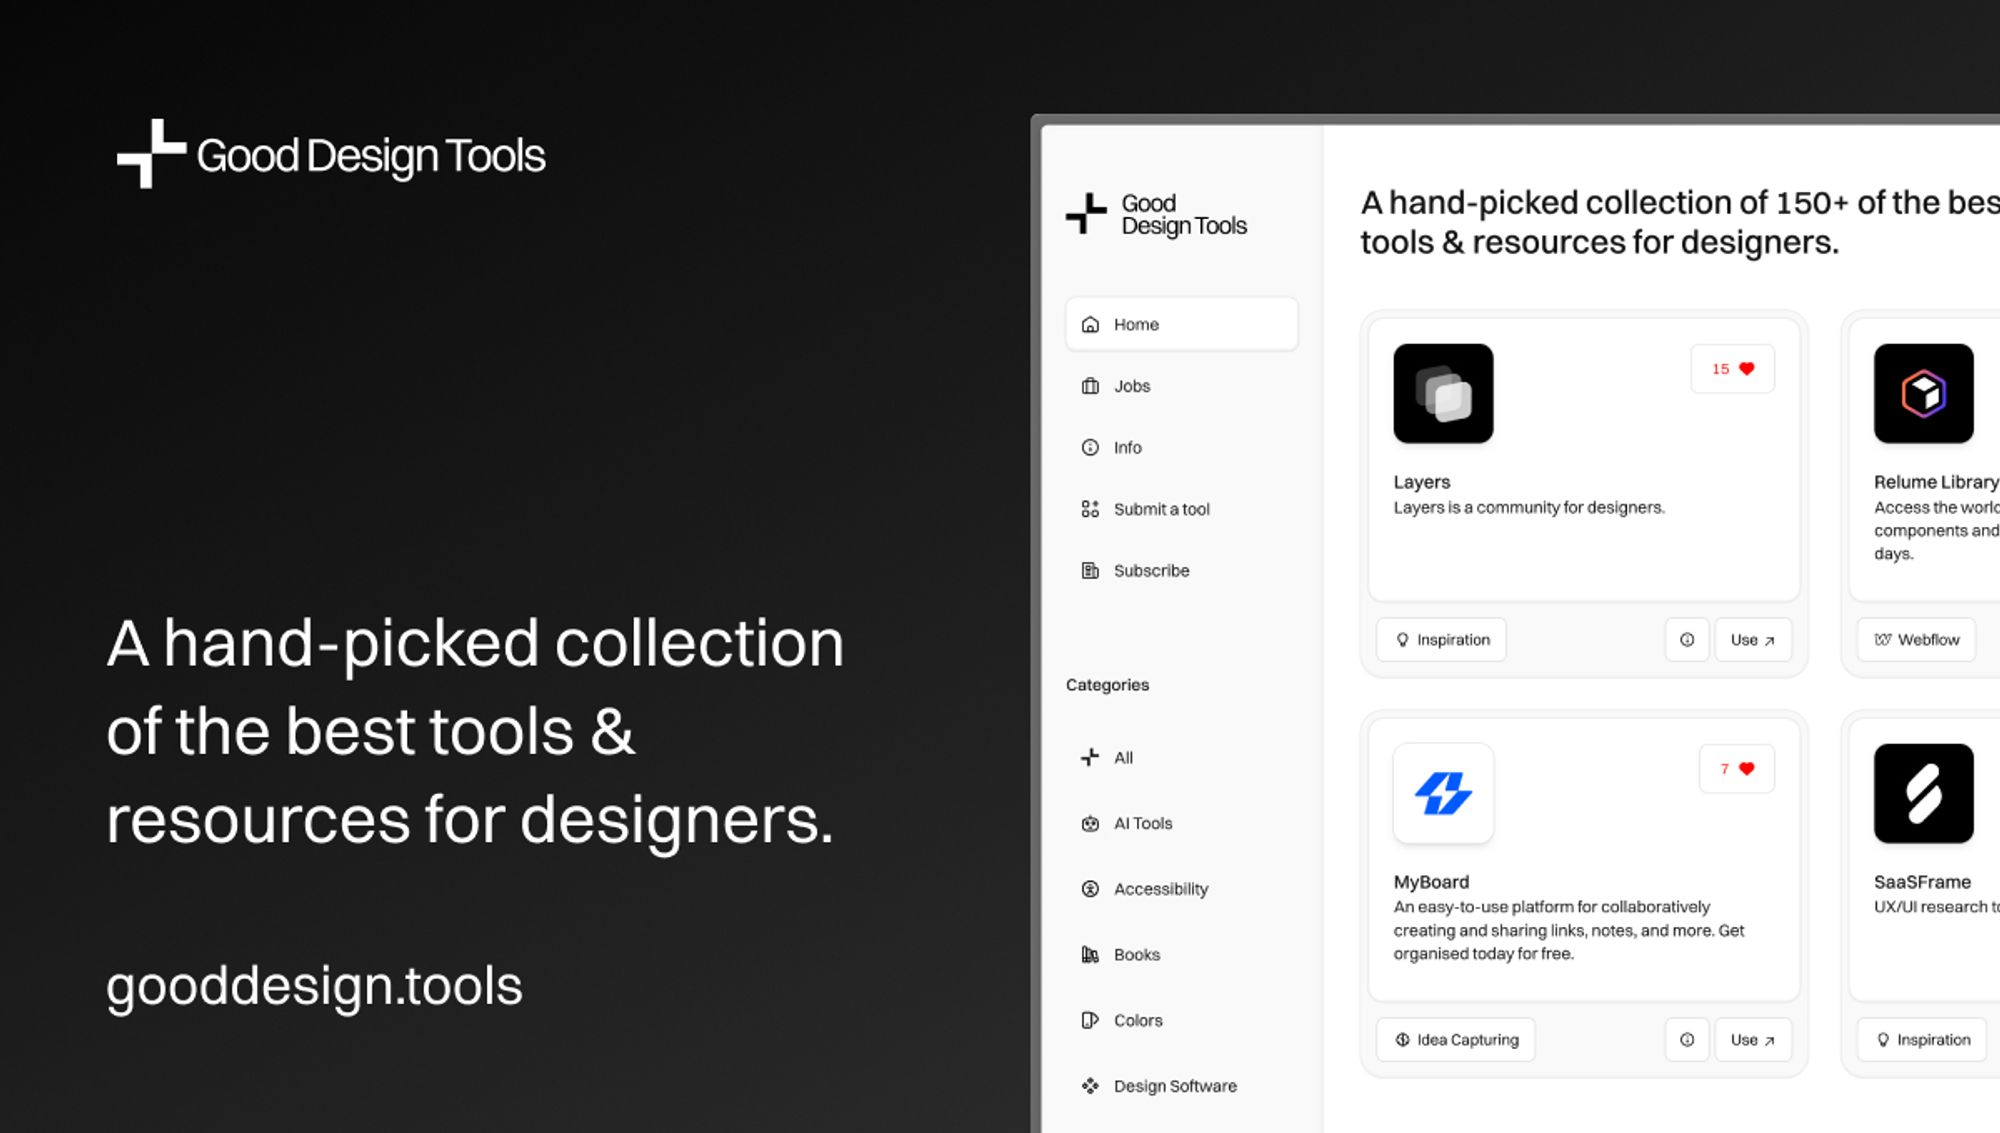 Good Design Tools - The best tools and resources for designers.